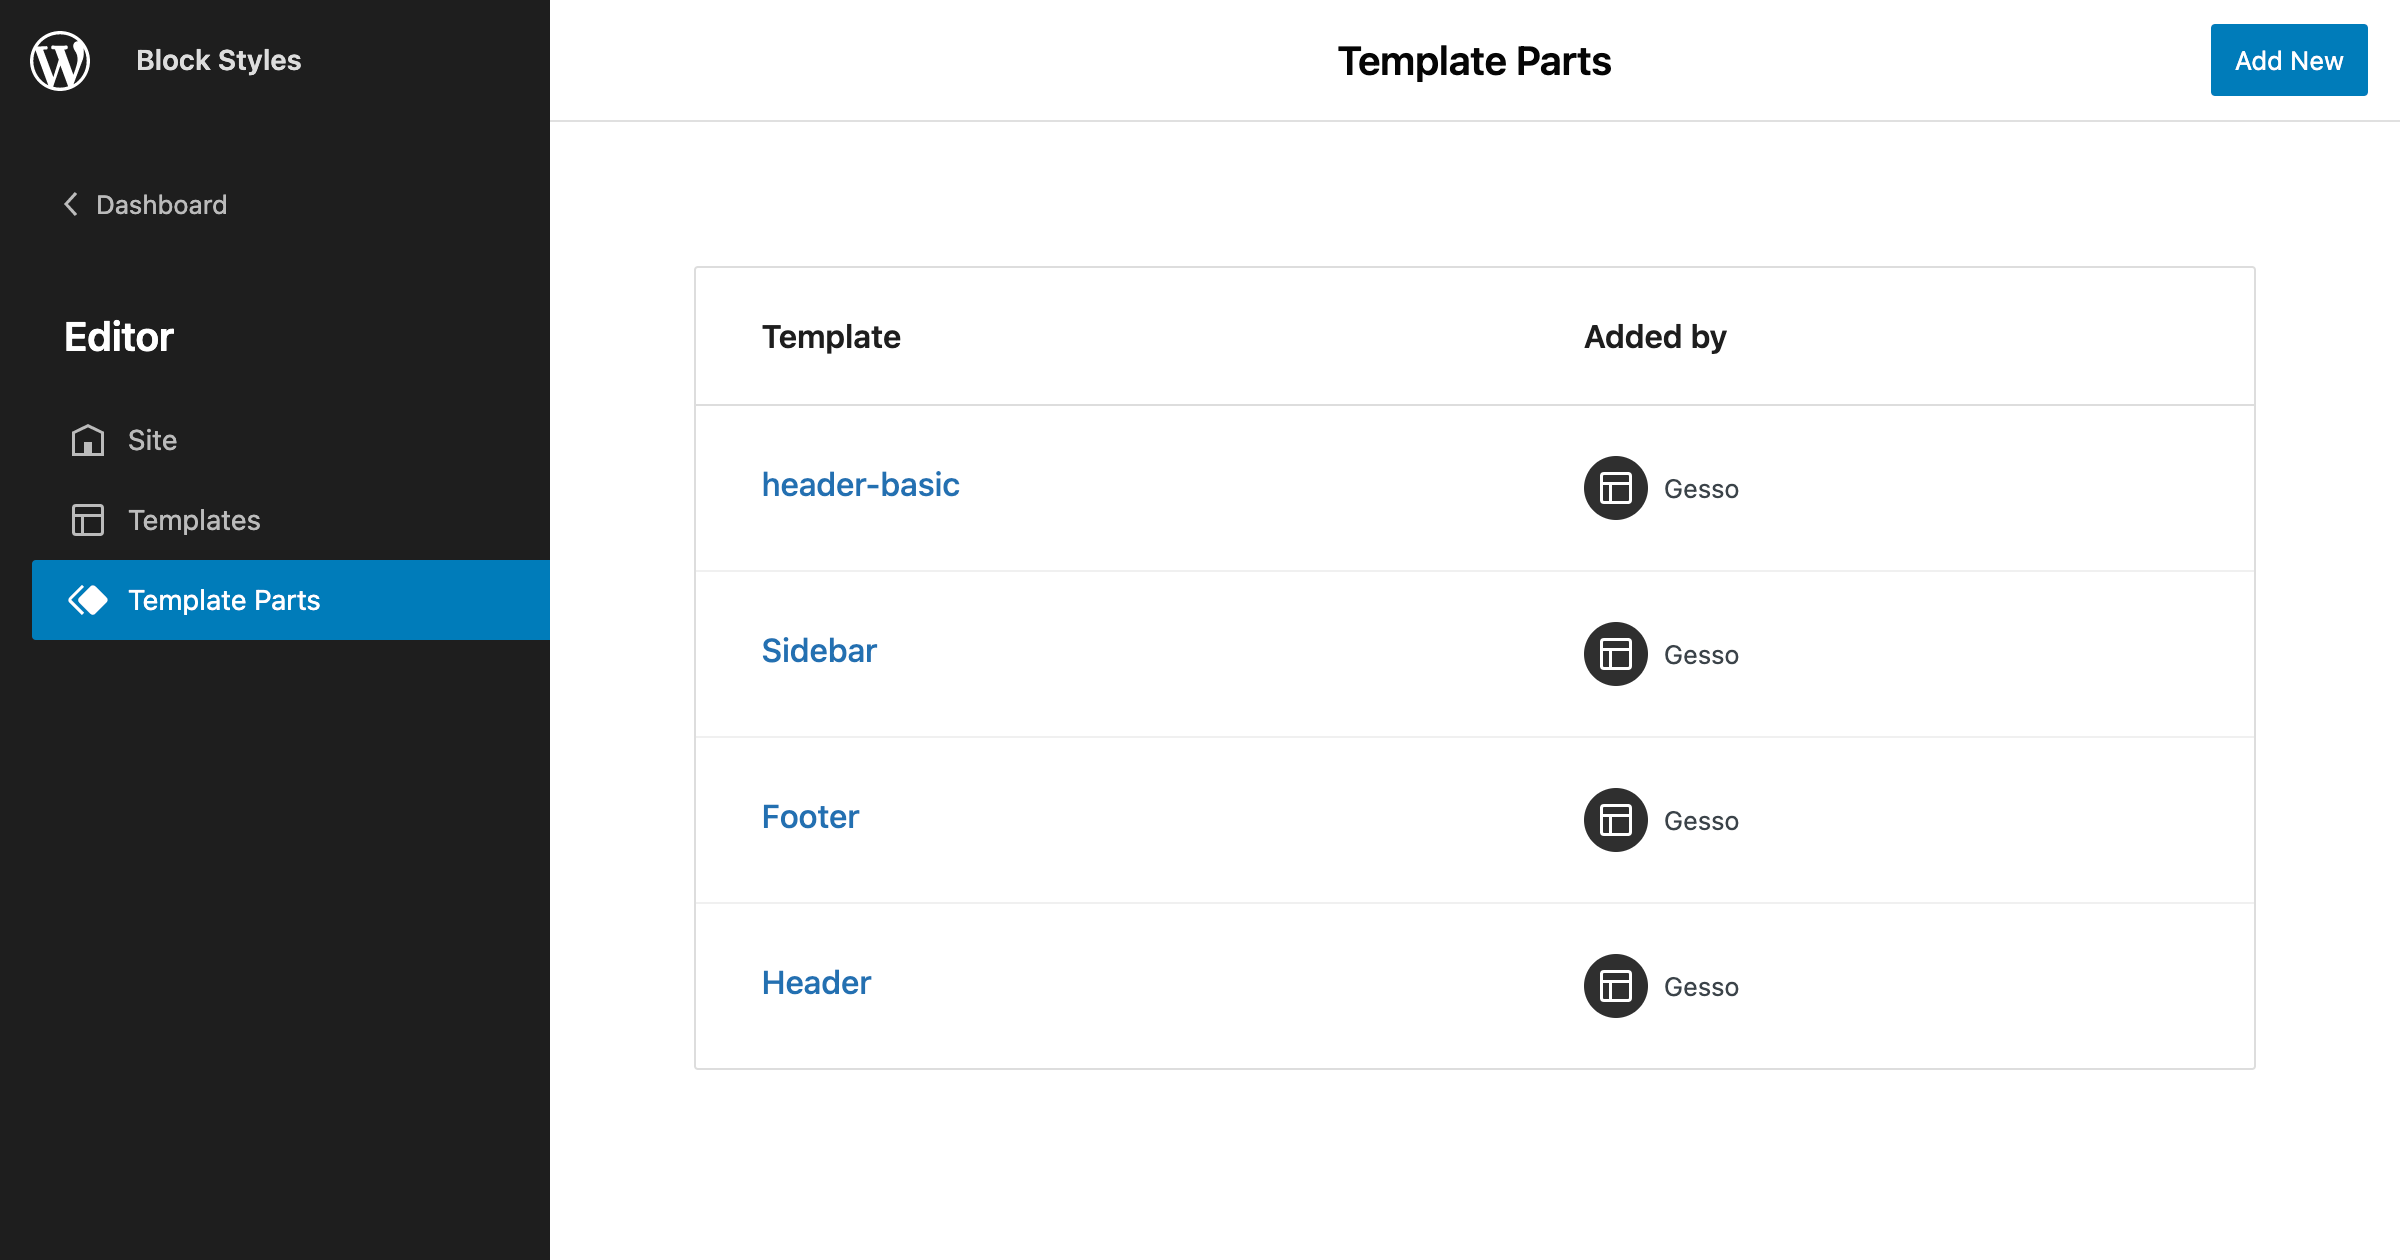 Missing Menu Items showing Template Parts view from WordPress admin area.